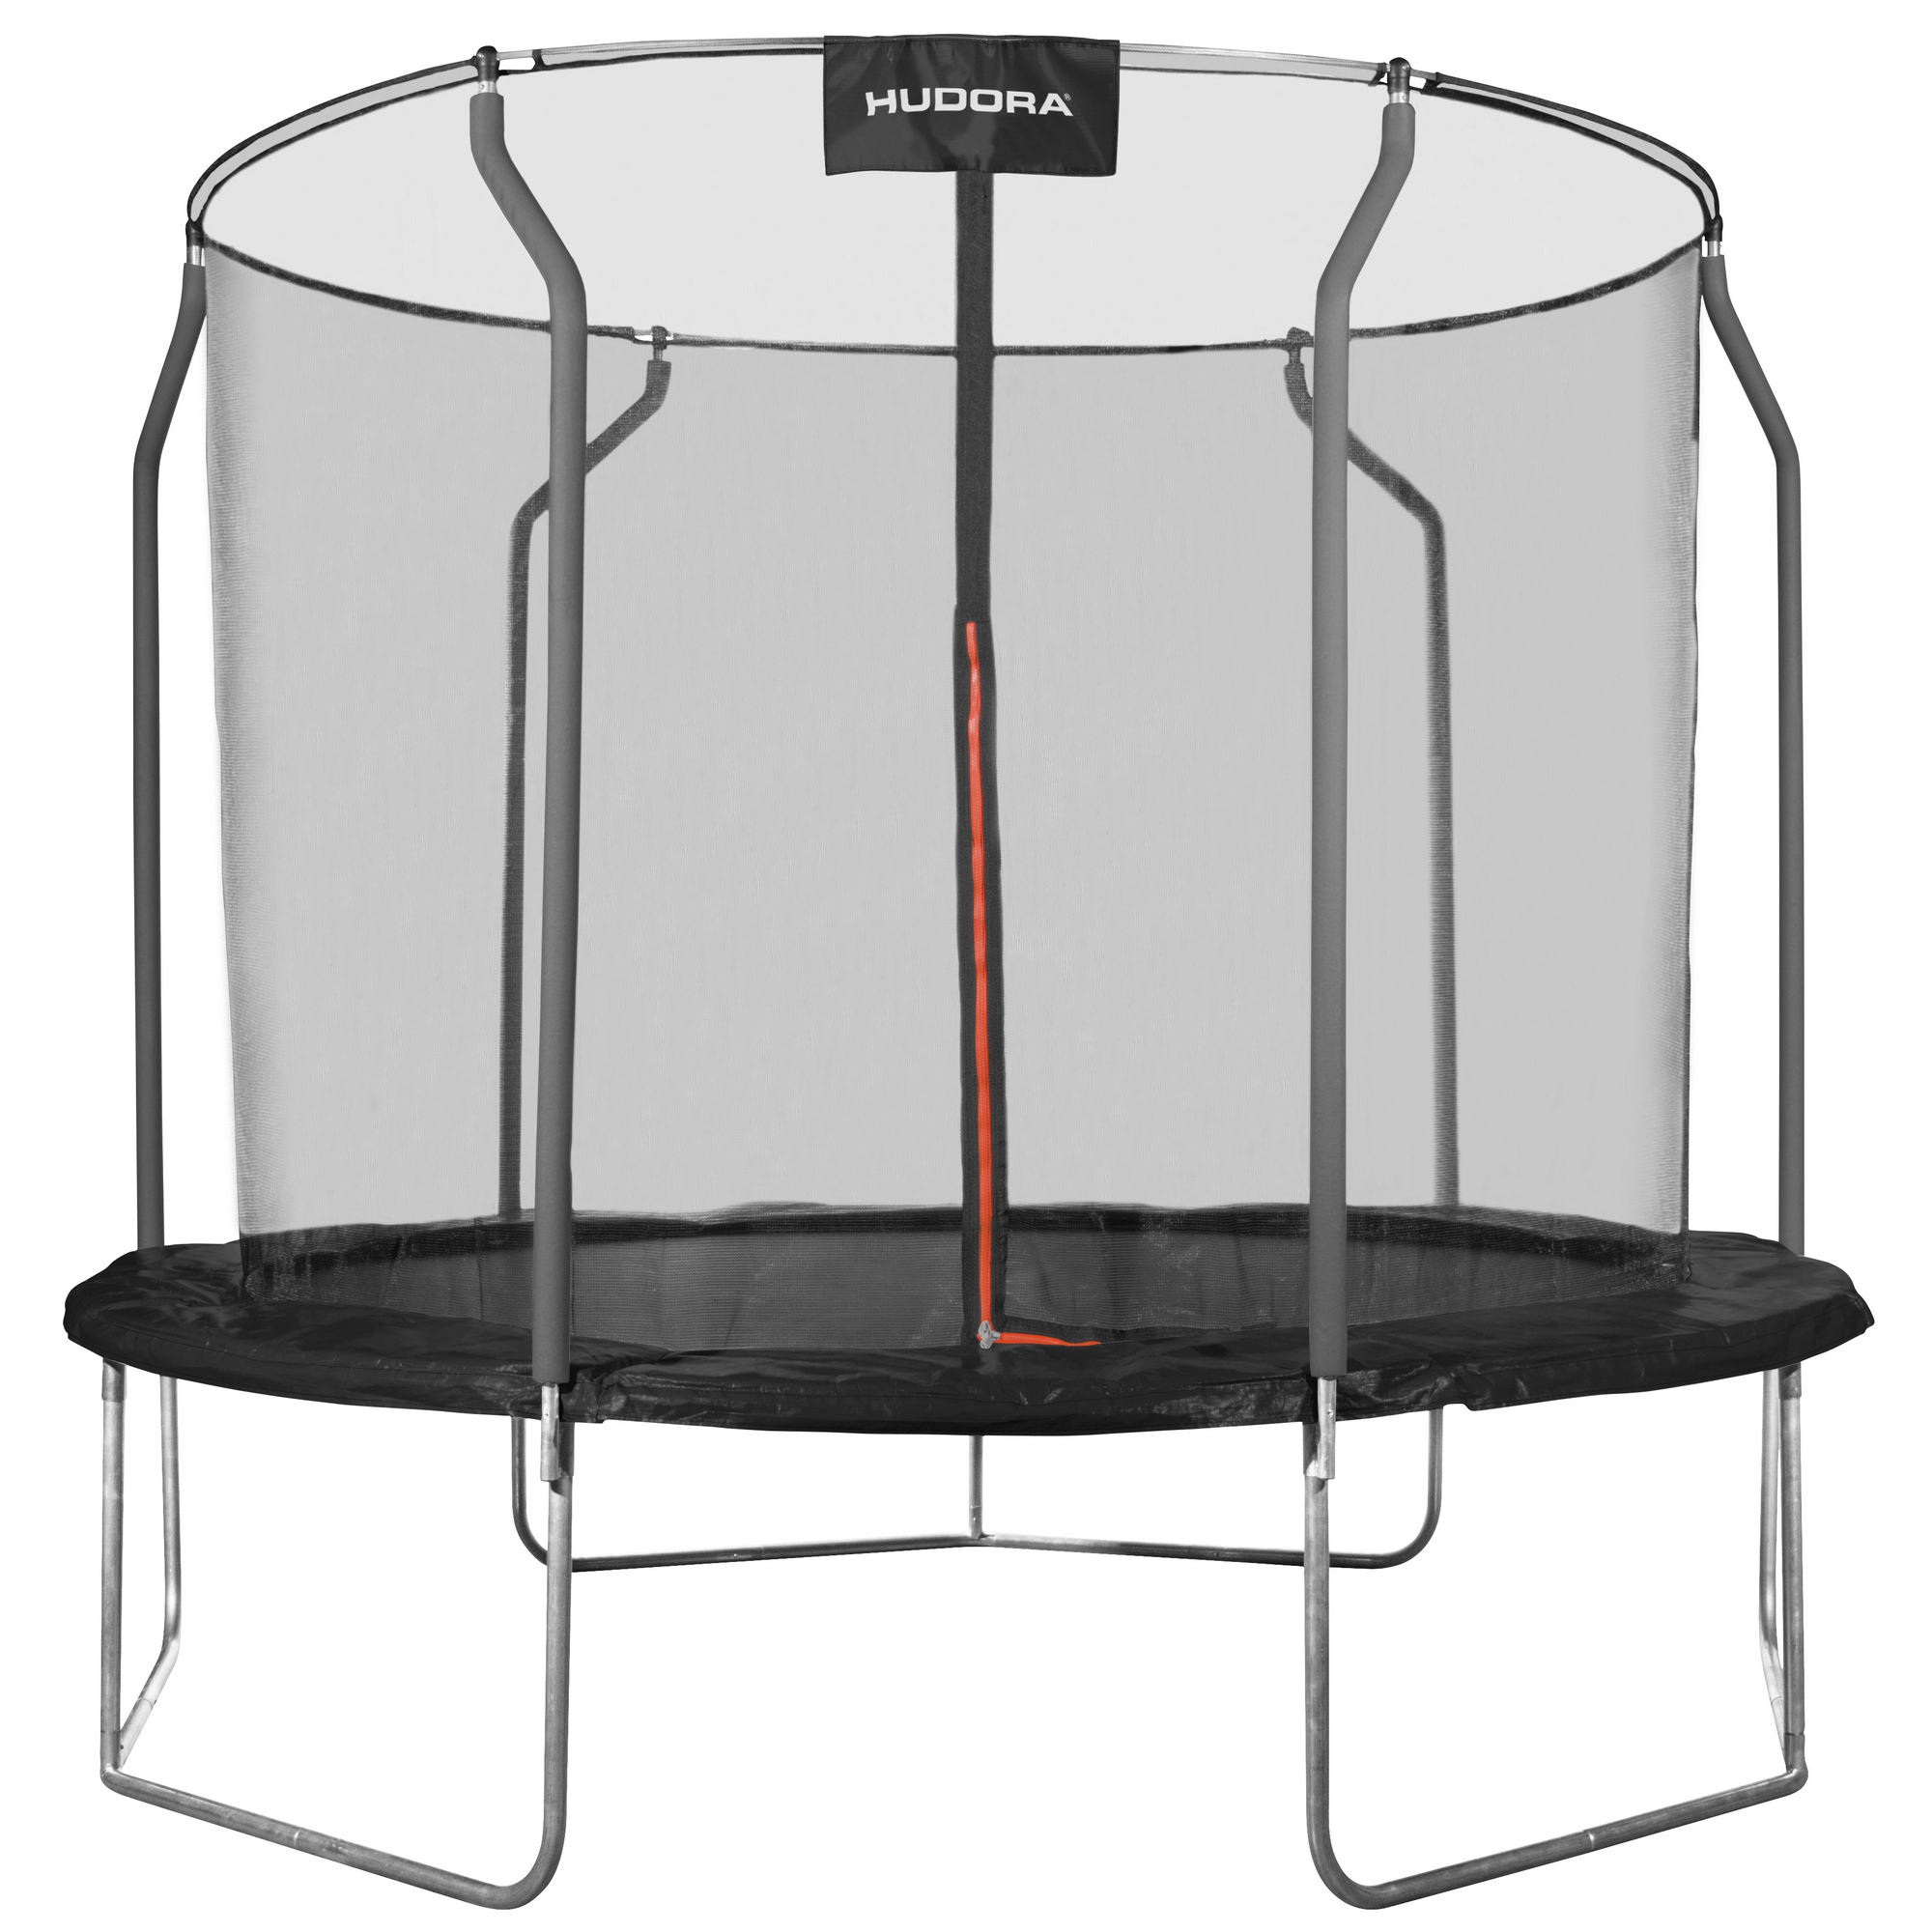 Trampolin 'First 300V' Ø 300 cm, schwarz + product picture